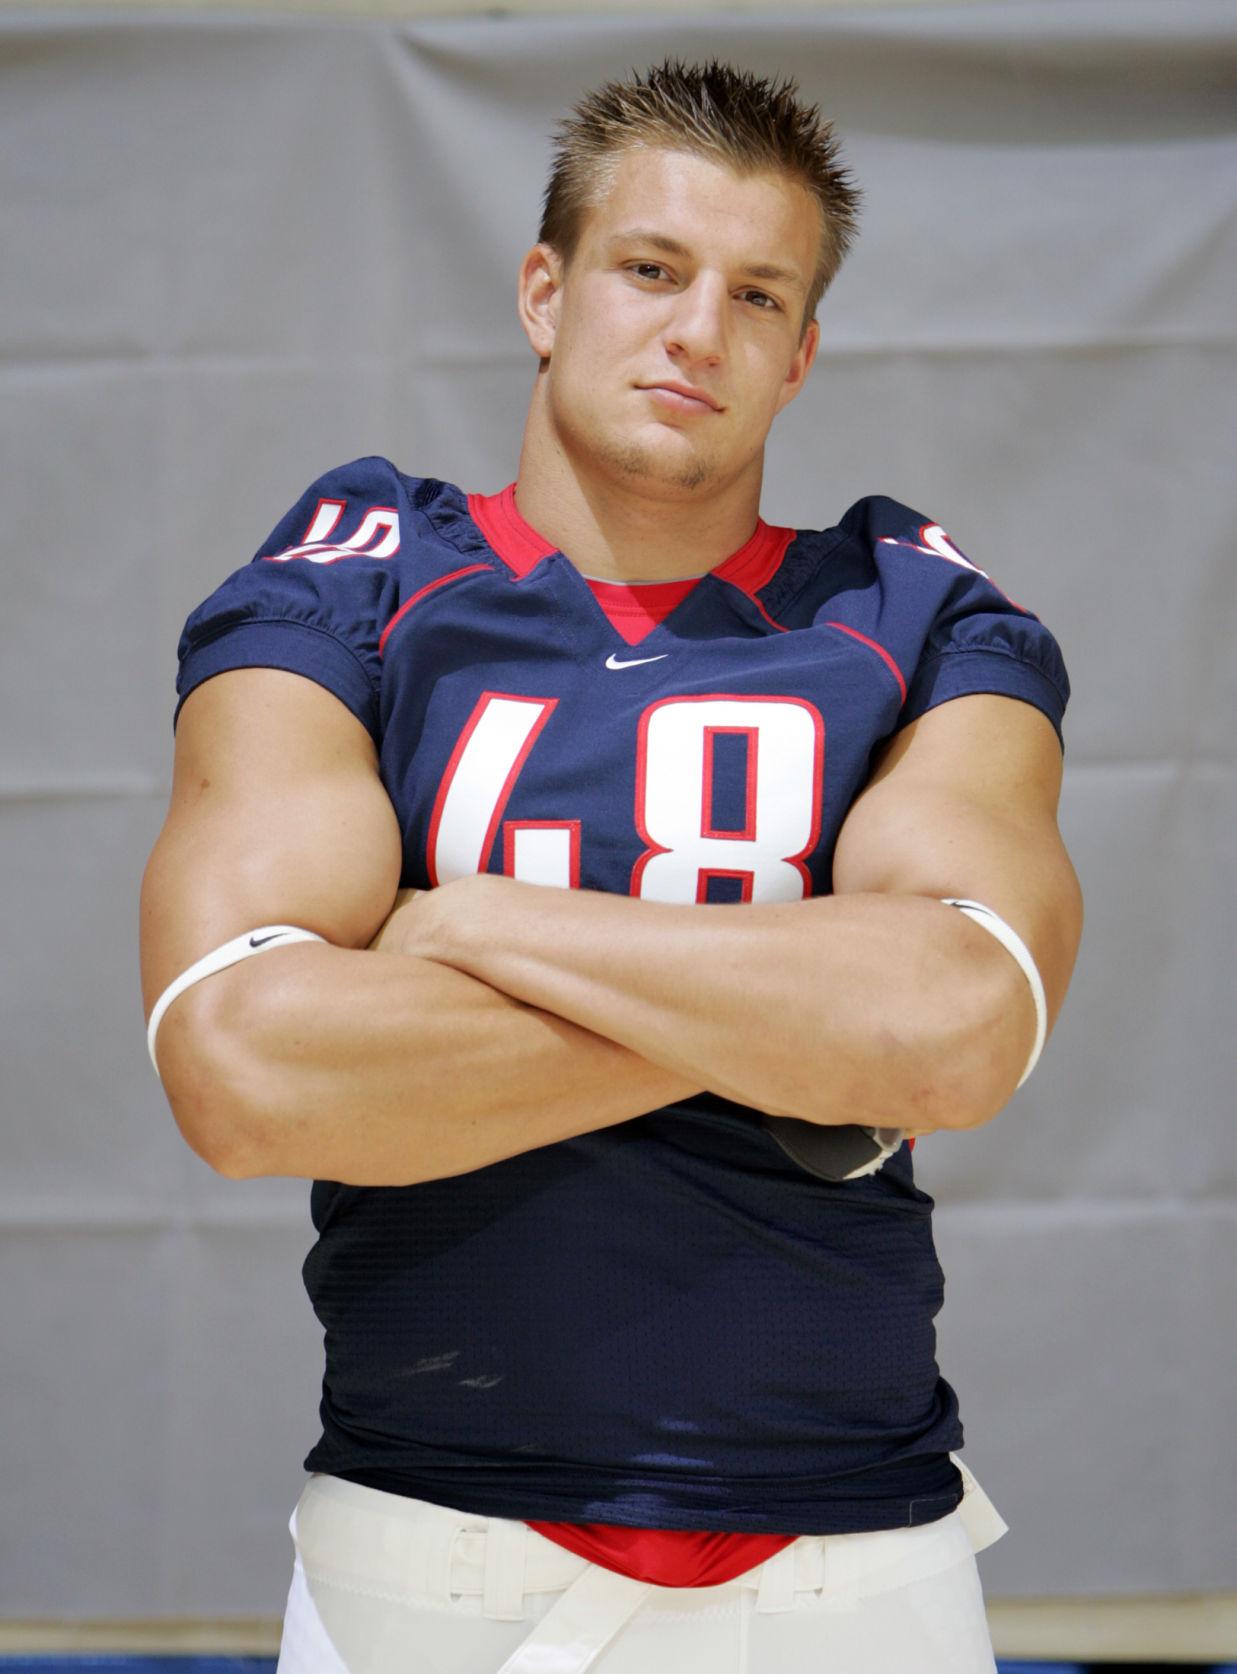 Wildcats great Rob Gronkowski retires, says he'll be 'chilling out